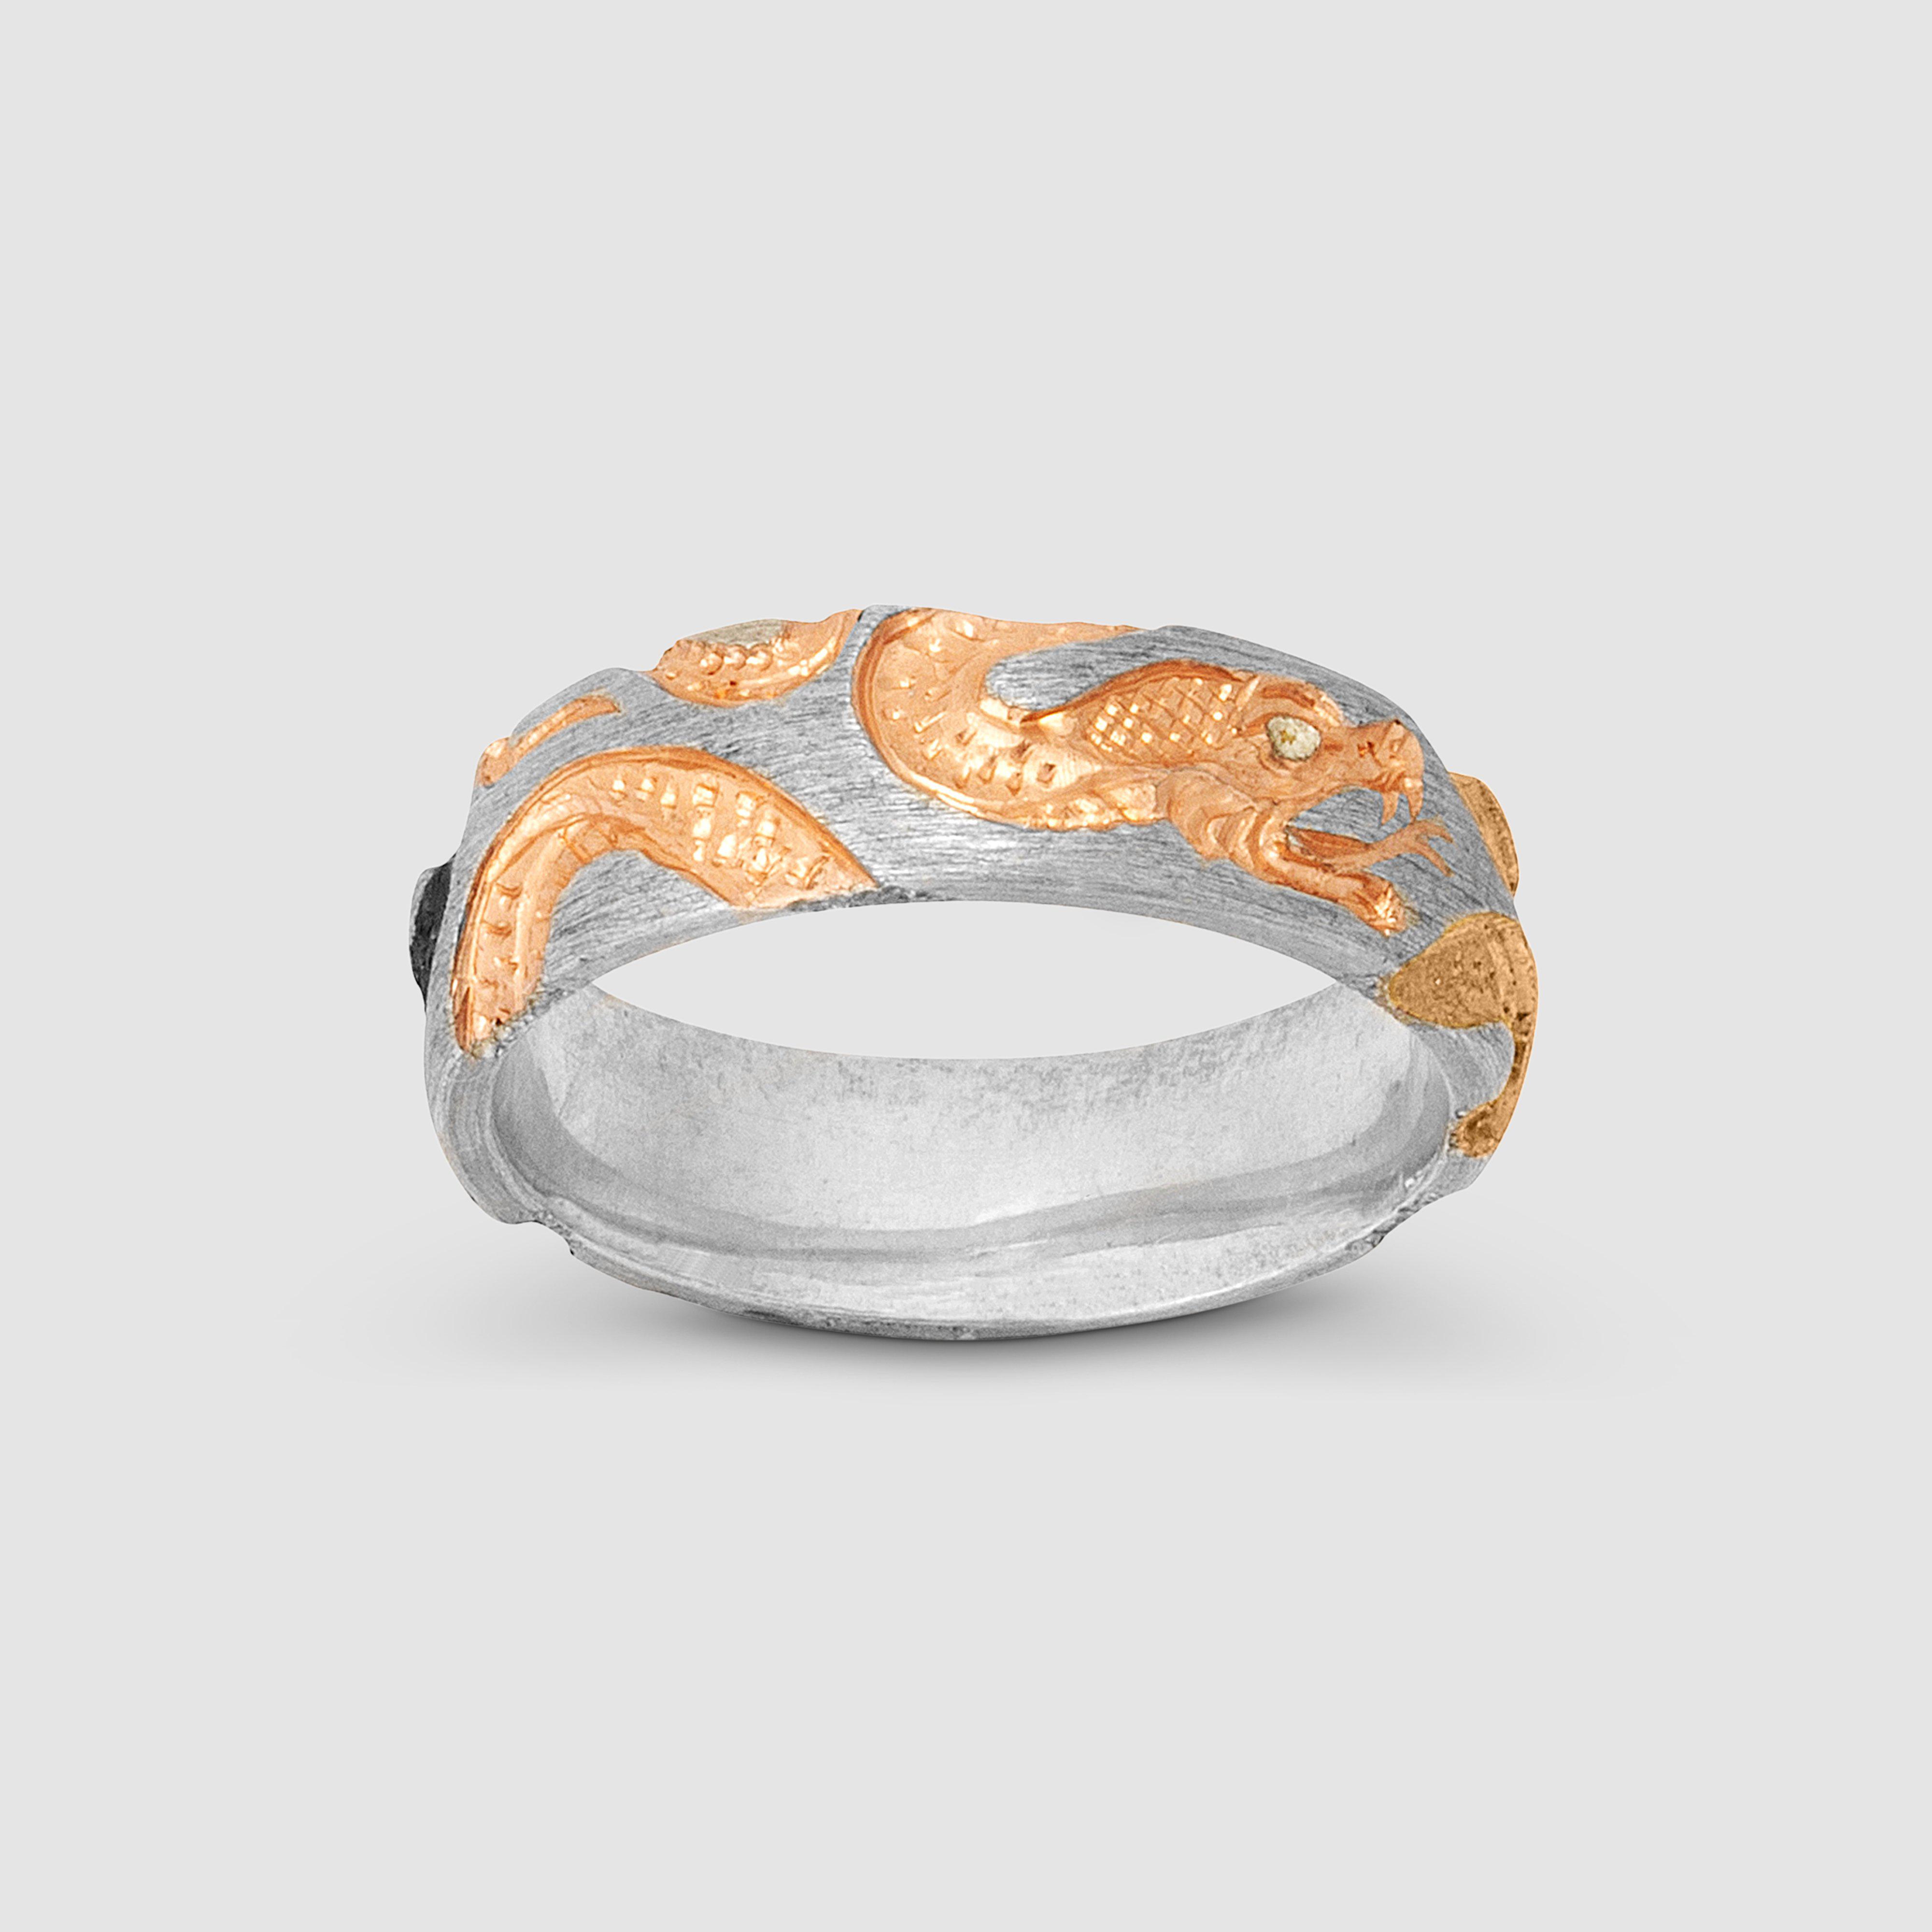 3 Serpents Ring by CASTRO